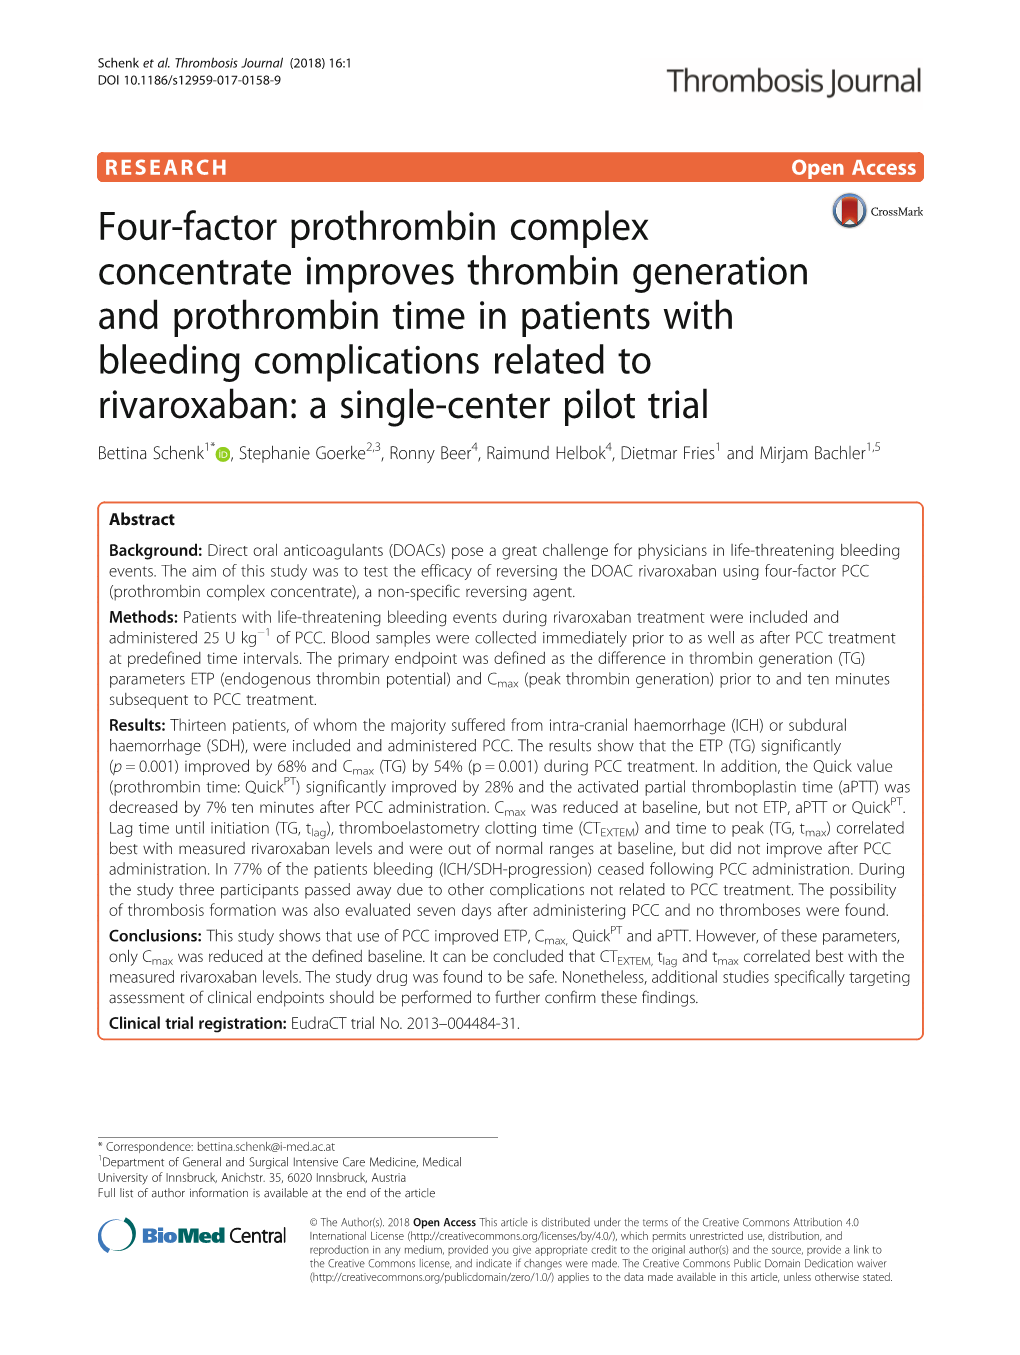 Four-Factor Prothrombin Complex Concentrate Improves Thrombin